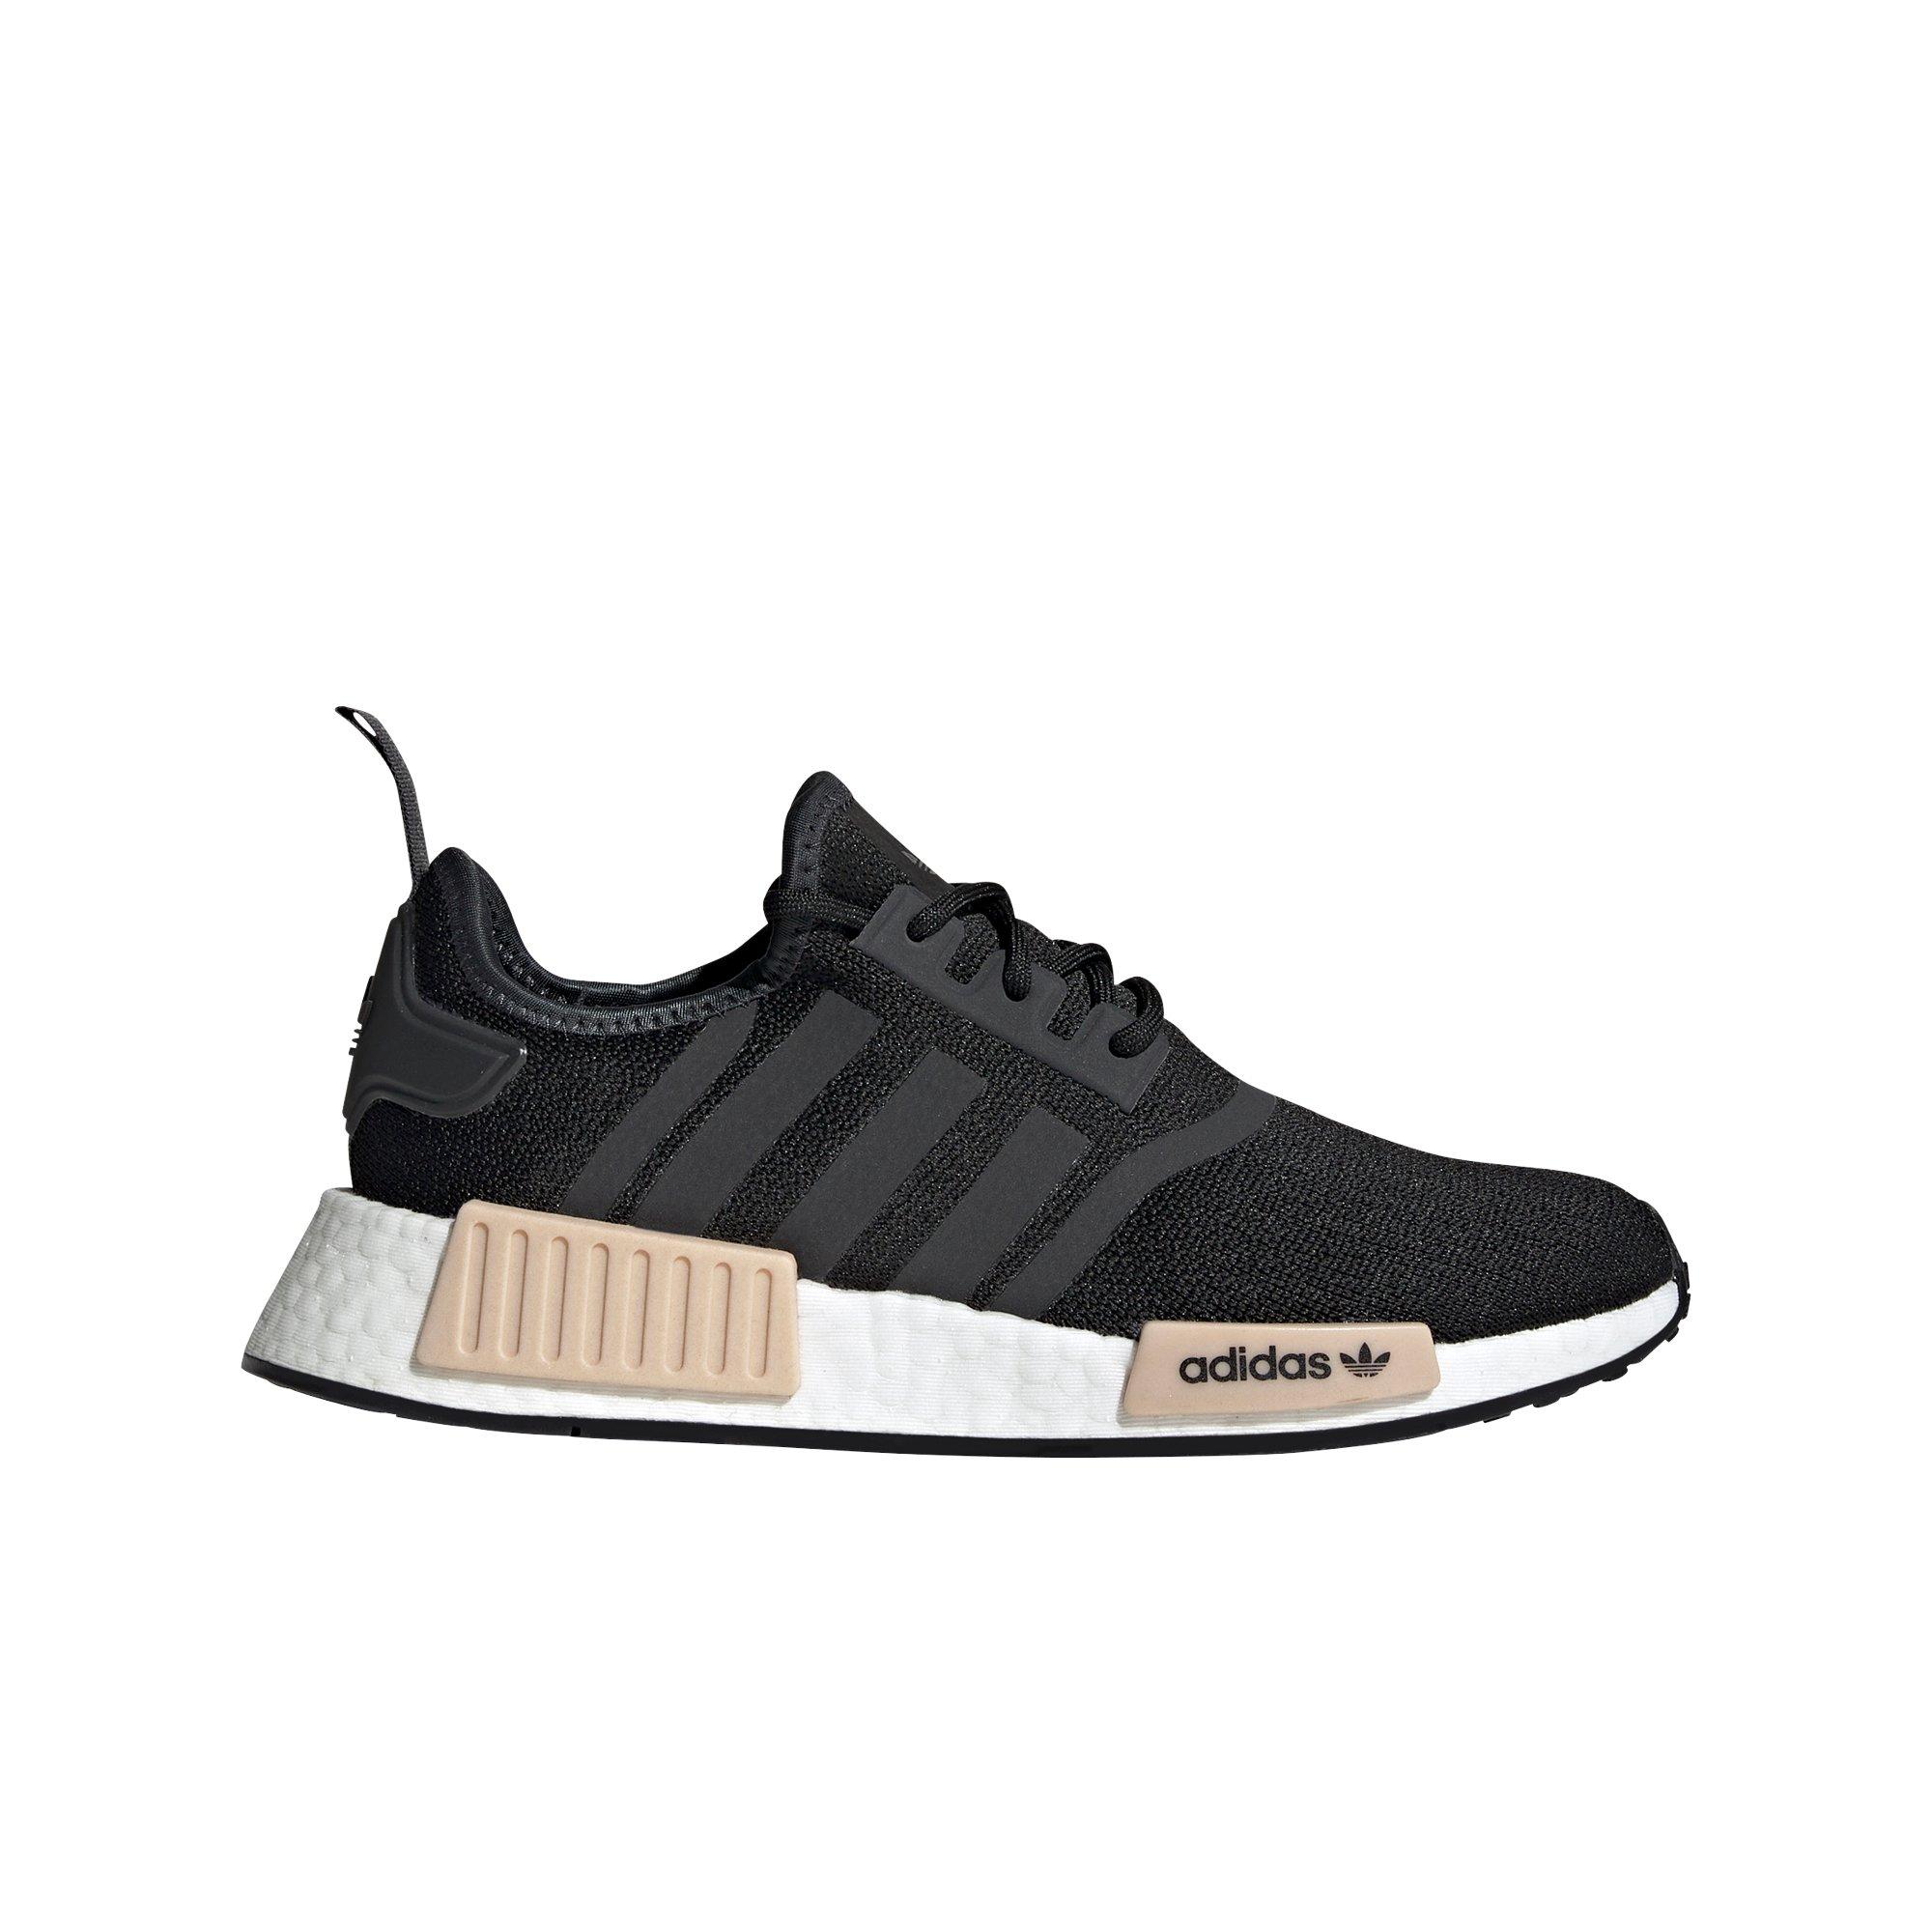 adidas NMD_R1 Shoes - Beige, Women's Lifestyle